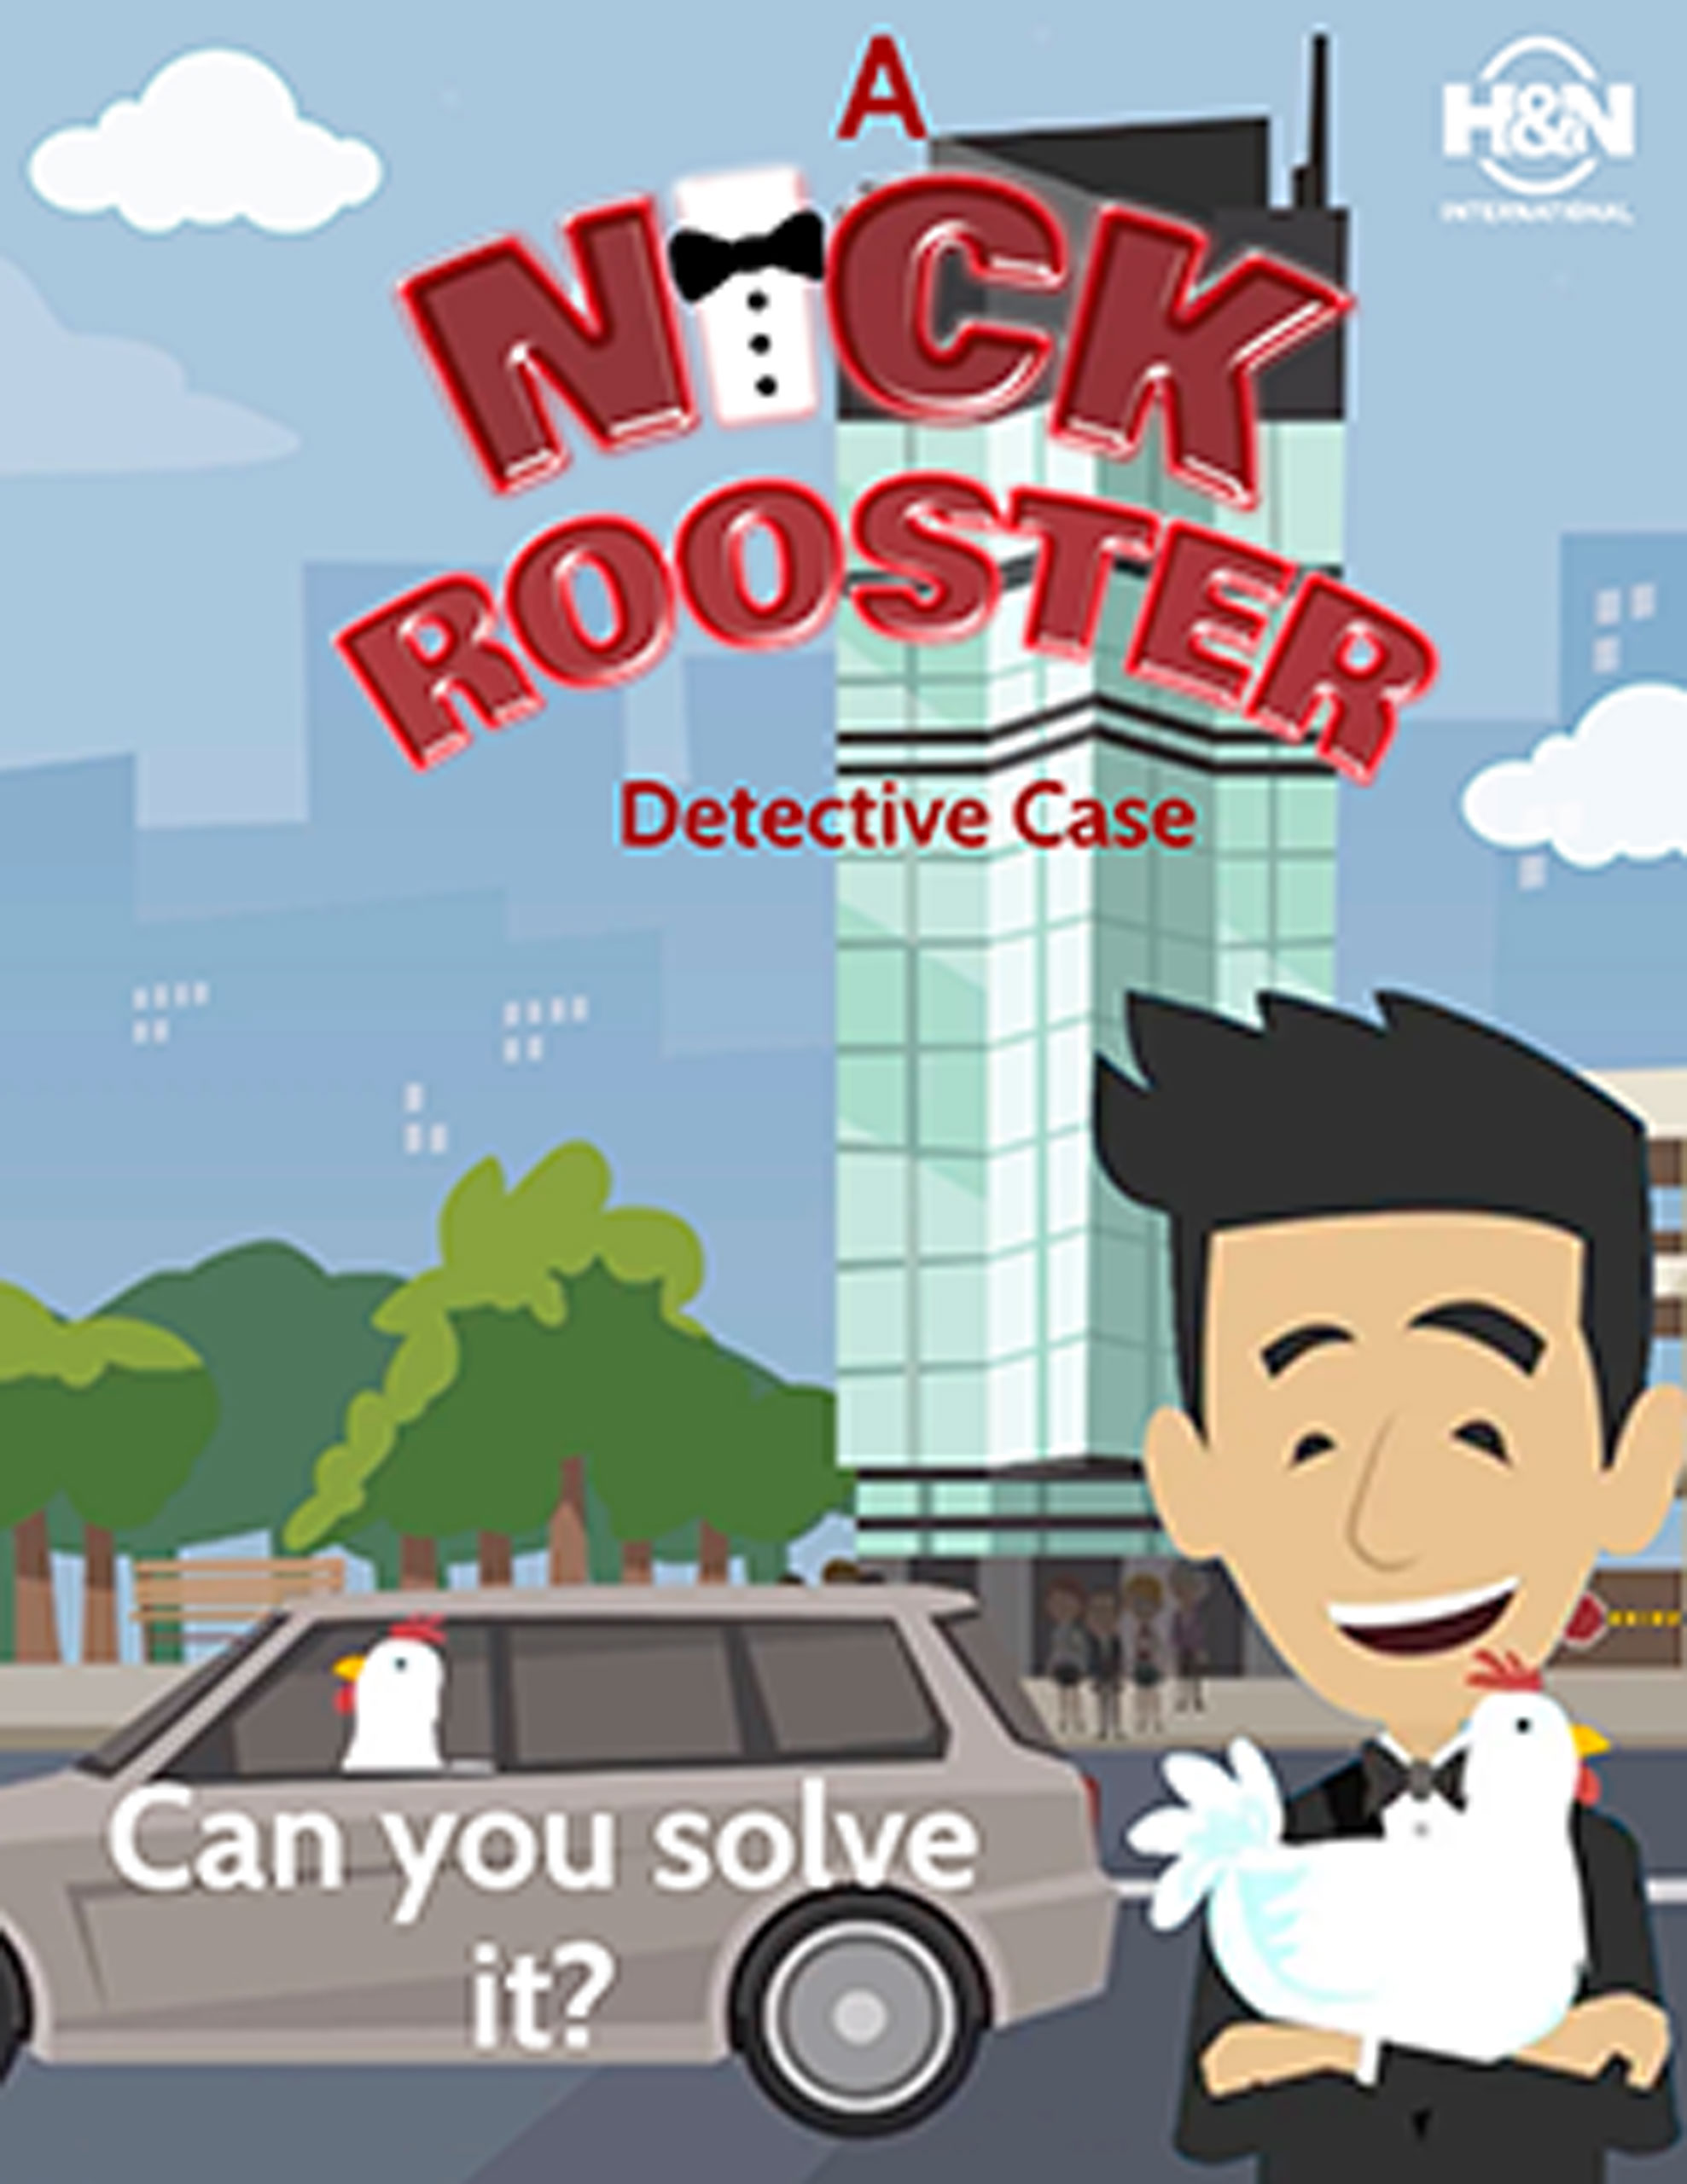 Nick Rooster case no. 10